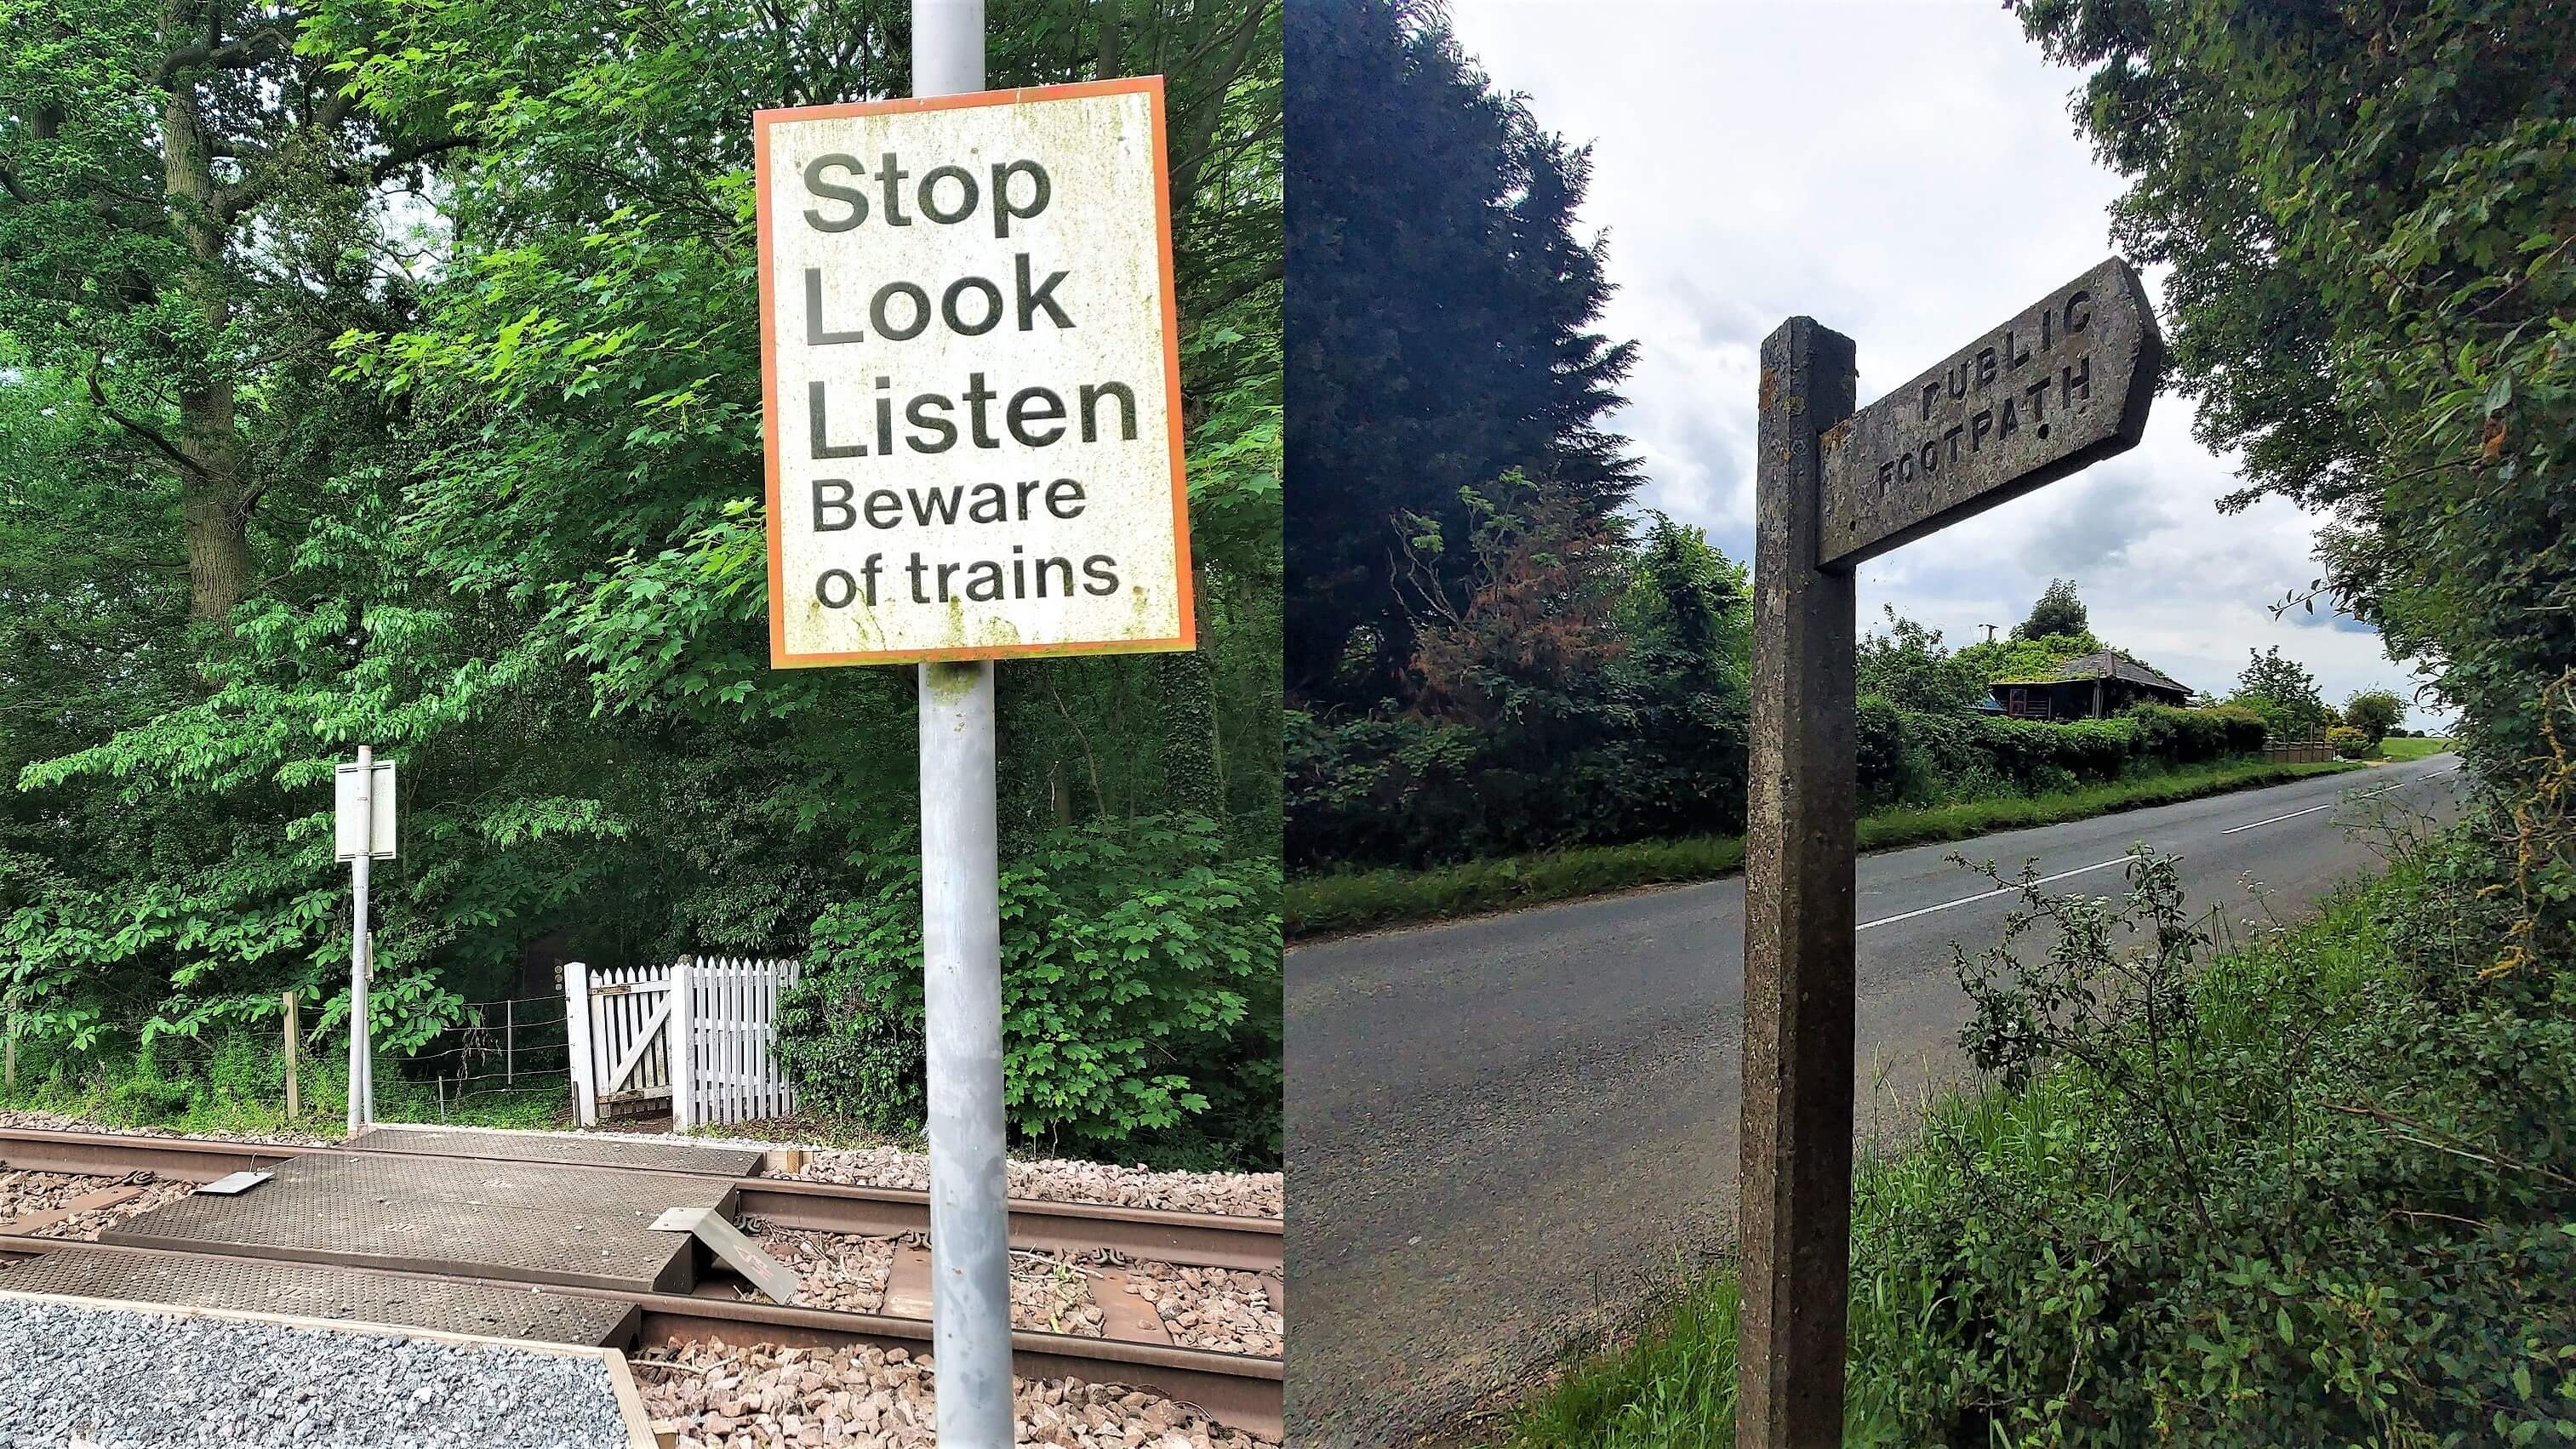 A warning sign at a level crossing that reads 'STOP LOOK LISTEN Beware of Trains' and a grey concrete sign for a public footpath